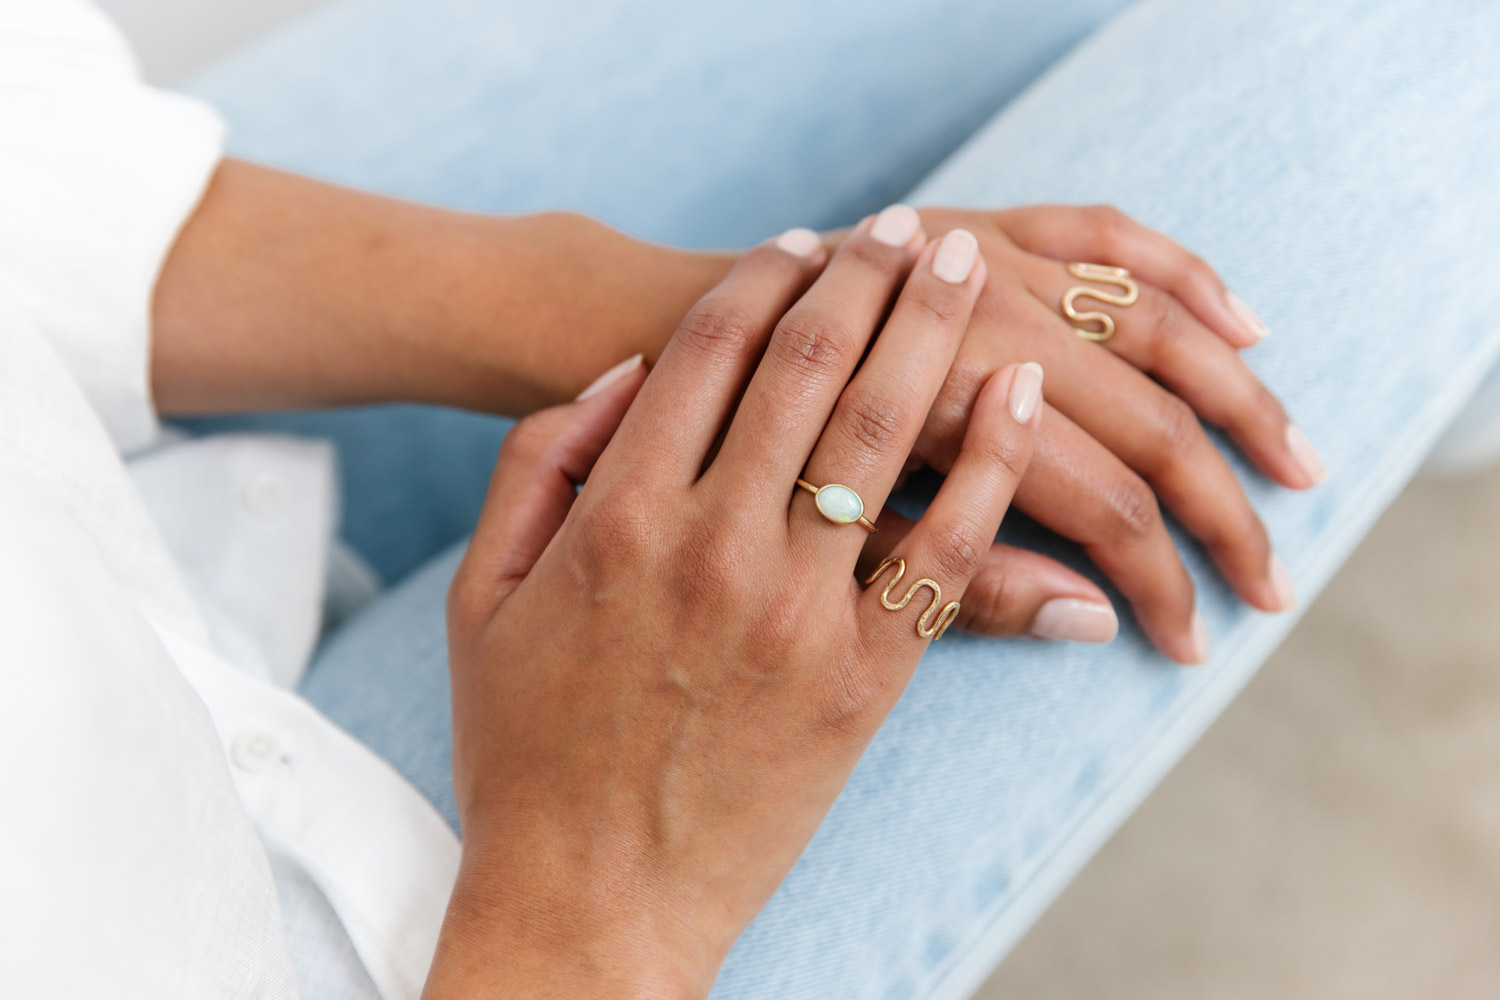 Women of colour wears rings created by Jane Jones Jewellery, with her hands resting on her leg, wearing light denim jeans and white linen top